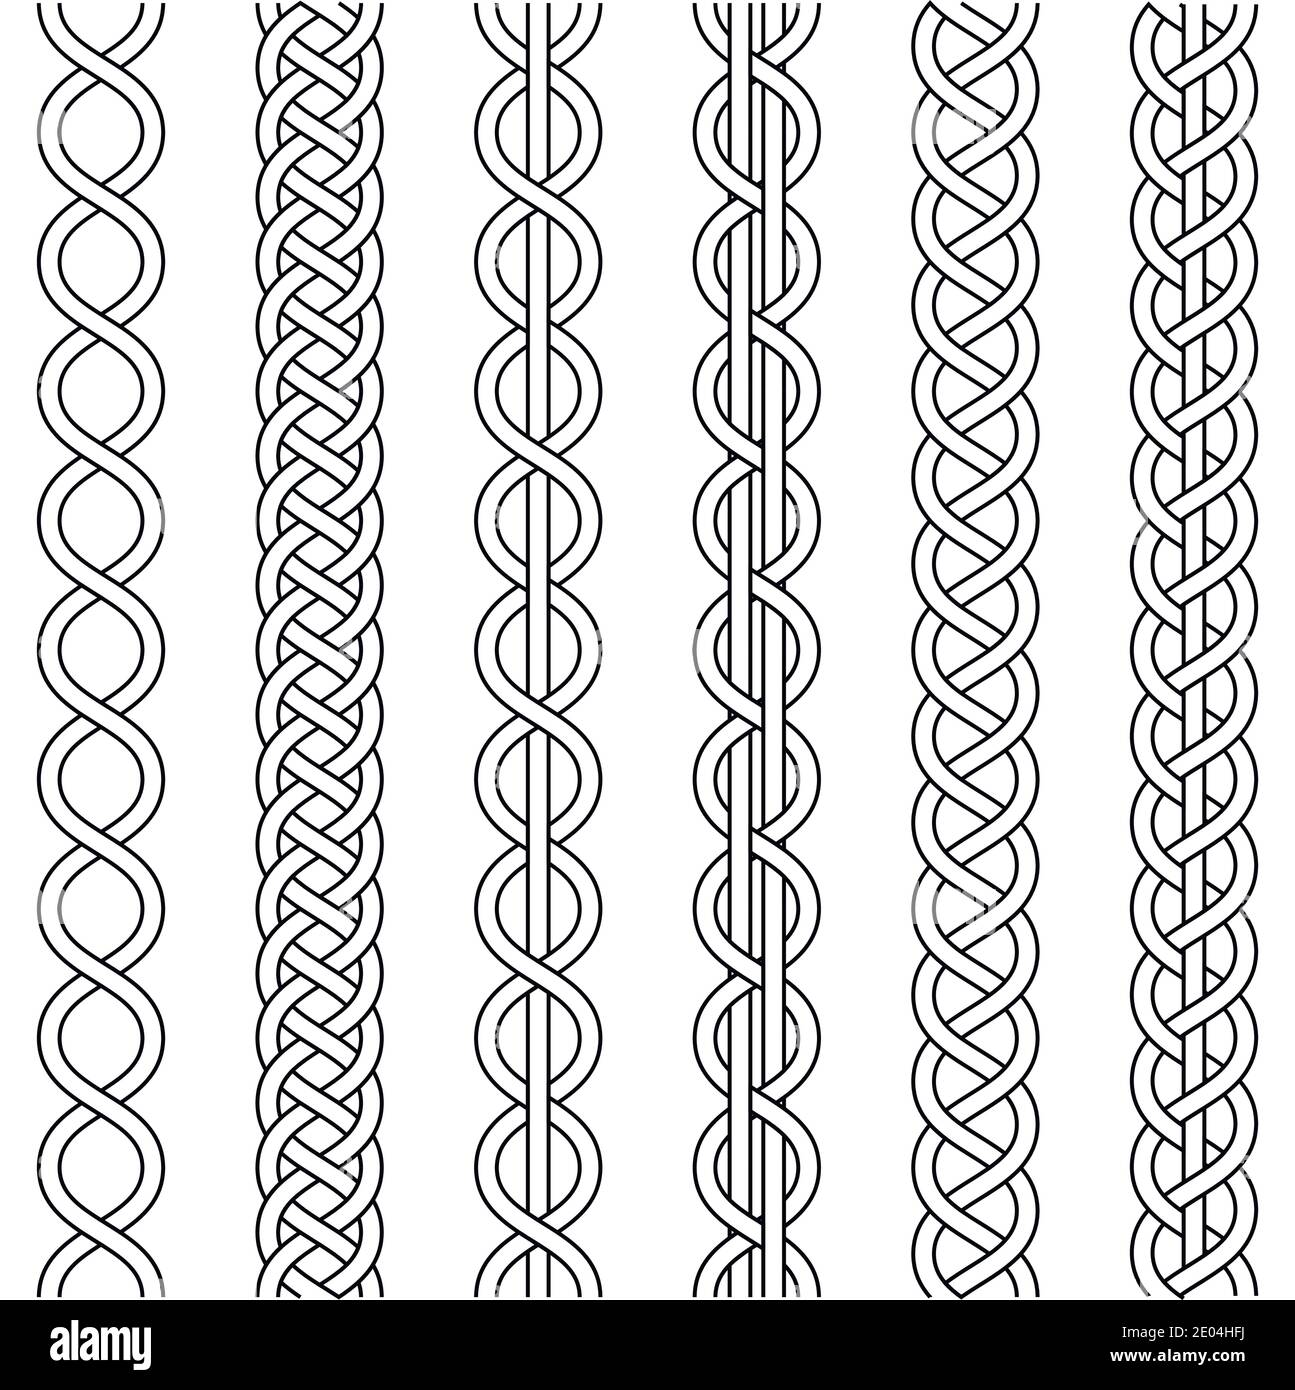 braided rope drawing